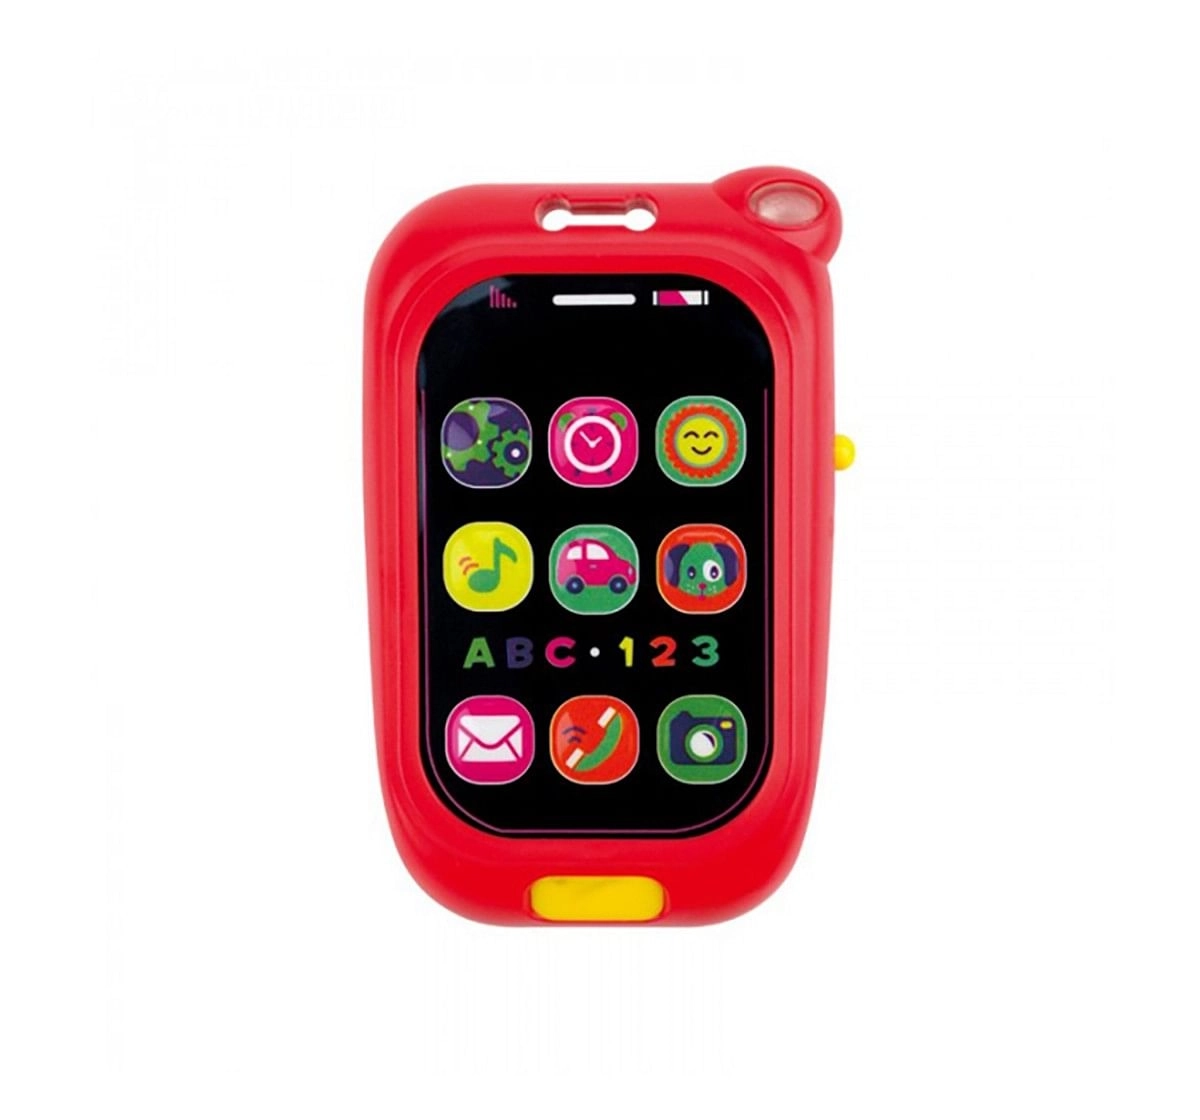 K'S Kids Intelligent Phone - New Born for Kids age 3M+ (Red)